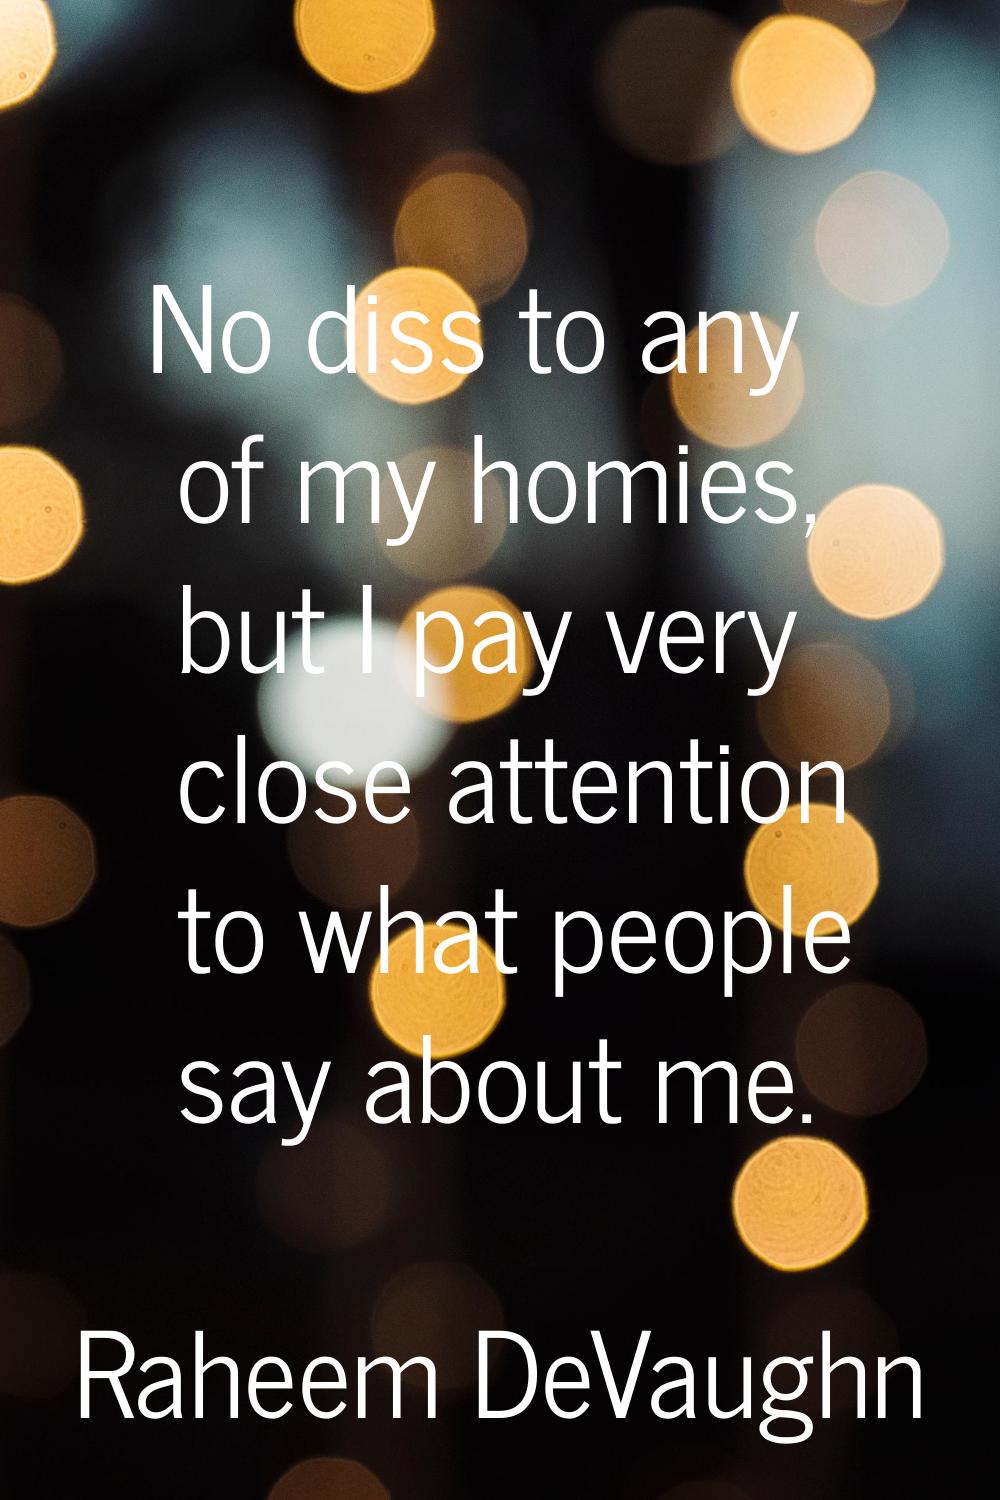 No diss to any of my homies, but I pay very close attention to what people say about me.